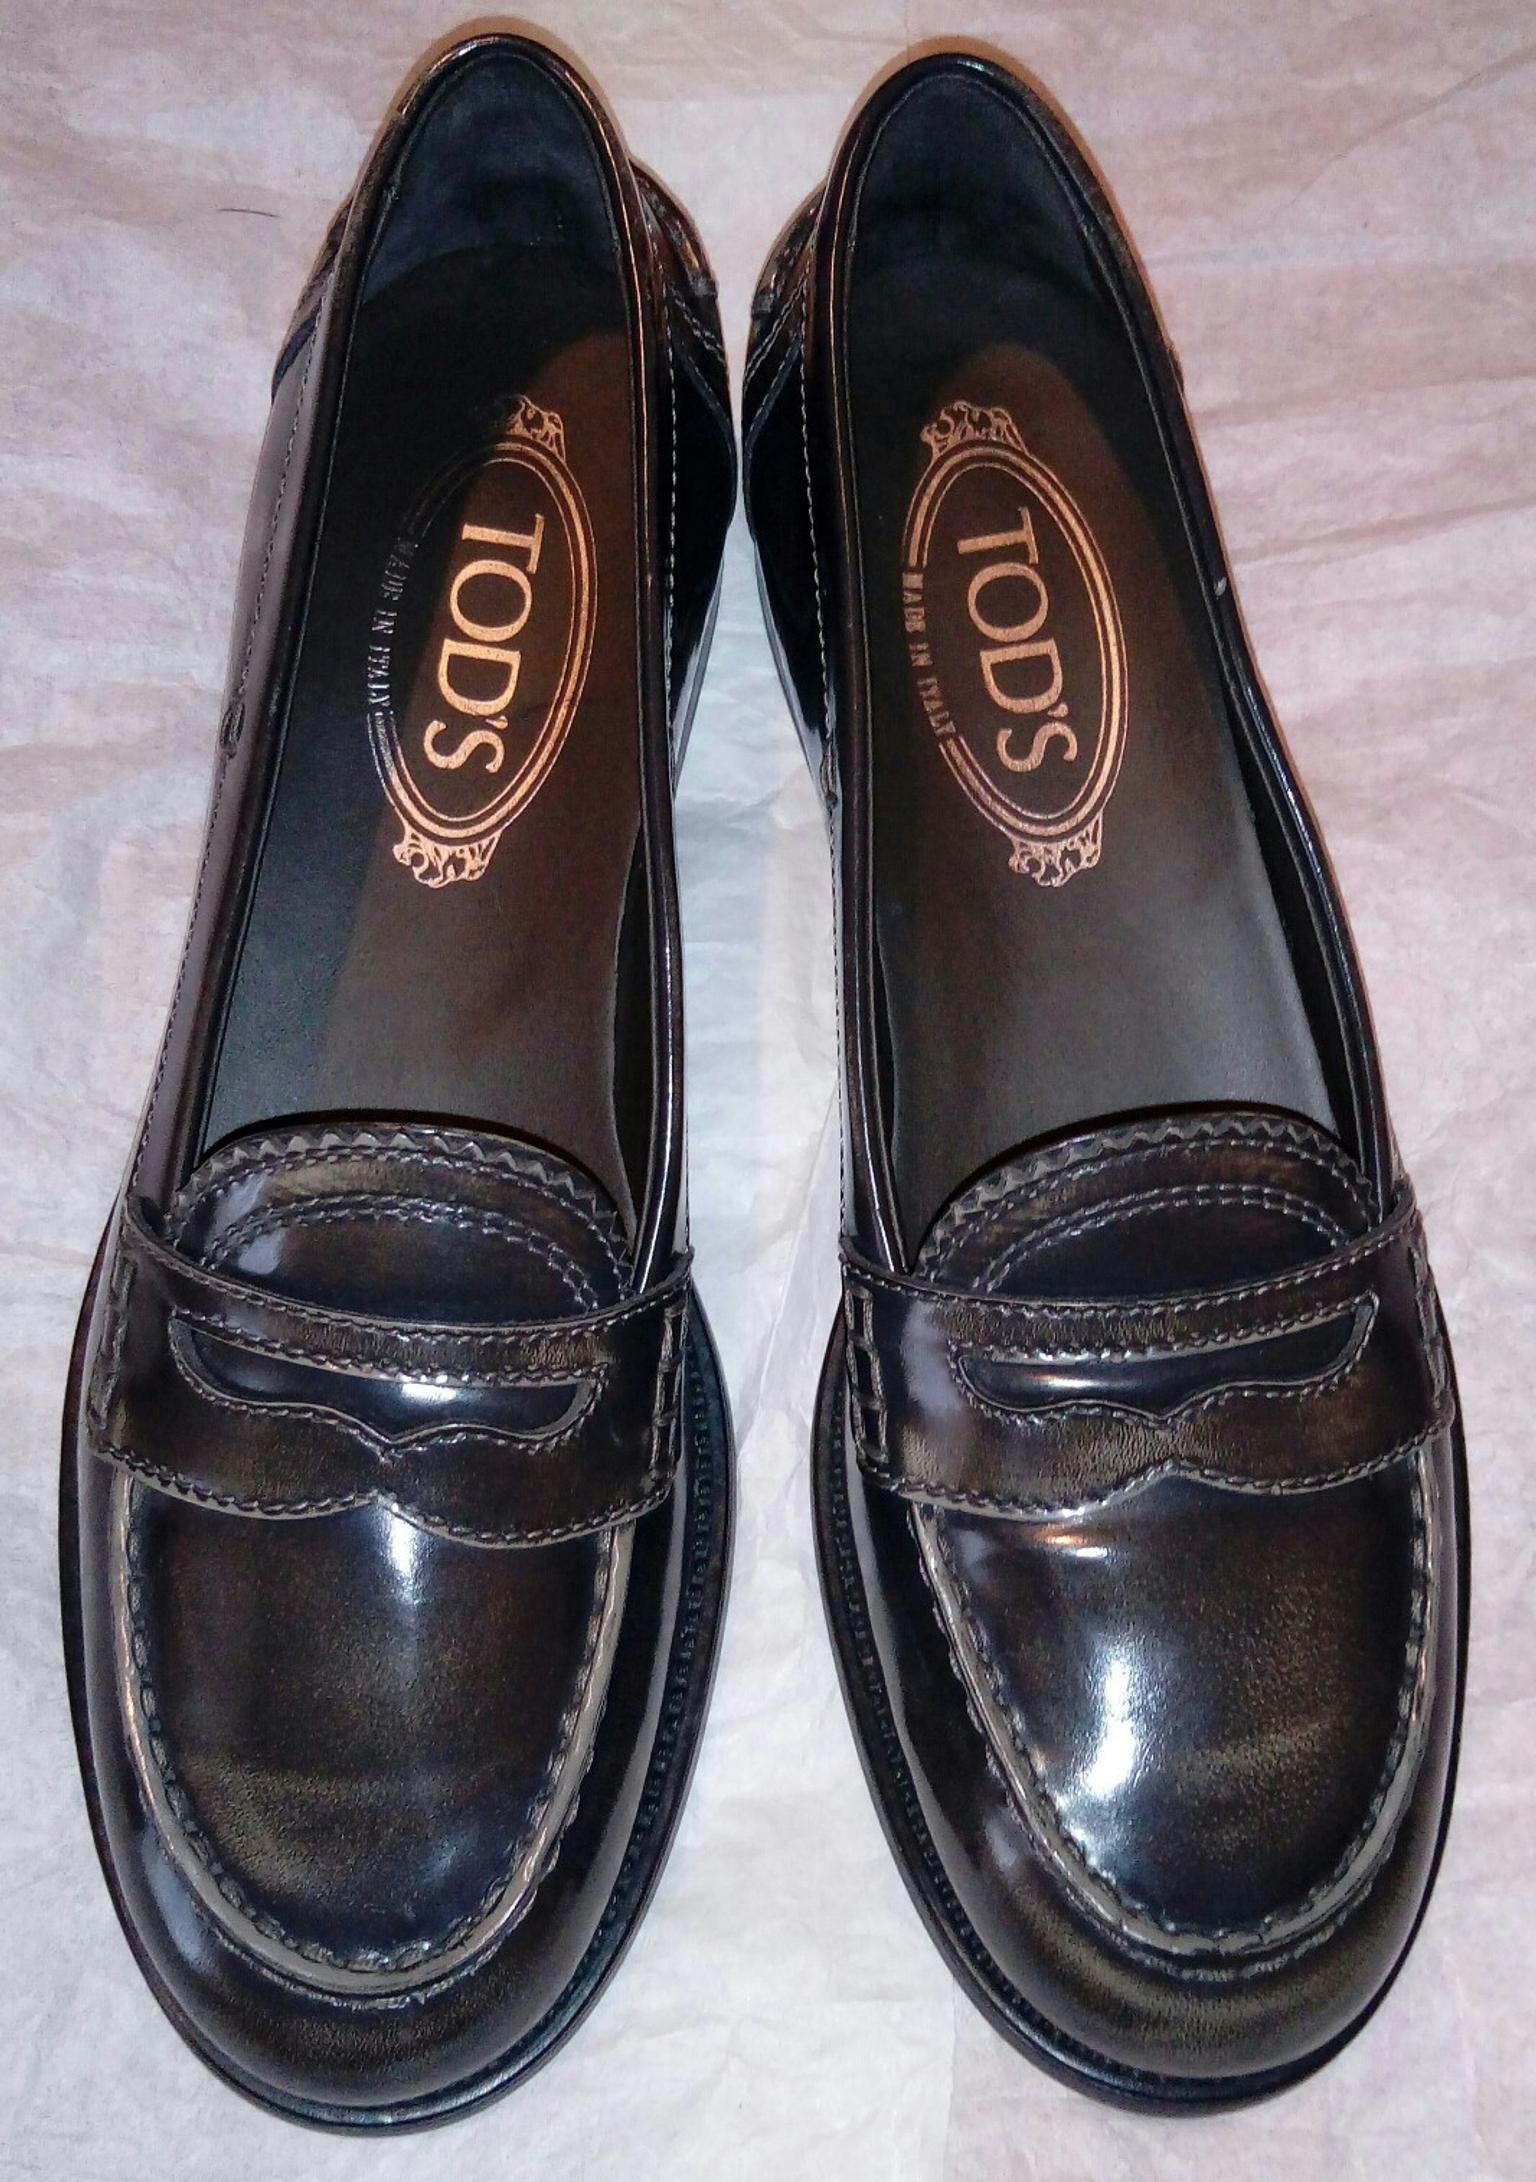 tods scarpe donna official d7adc dee67